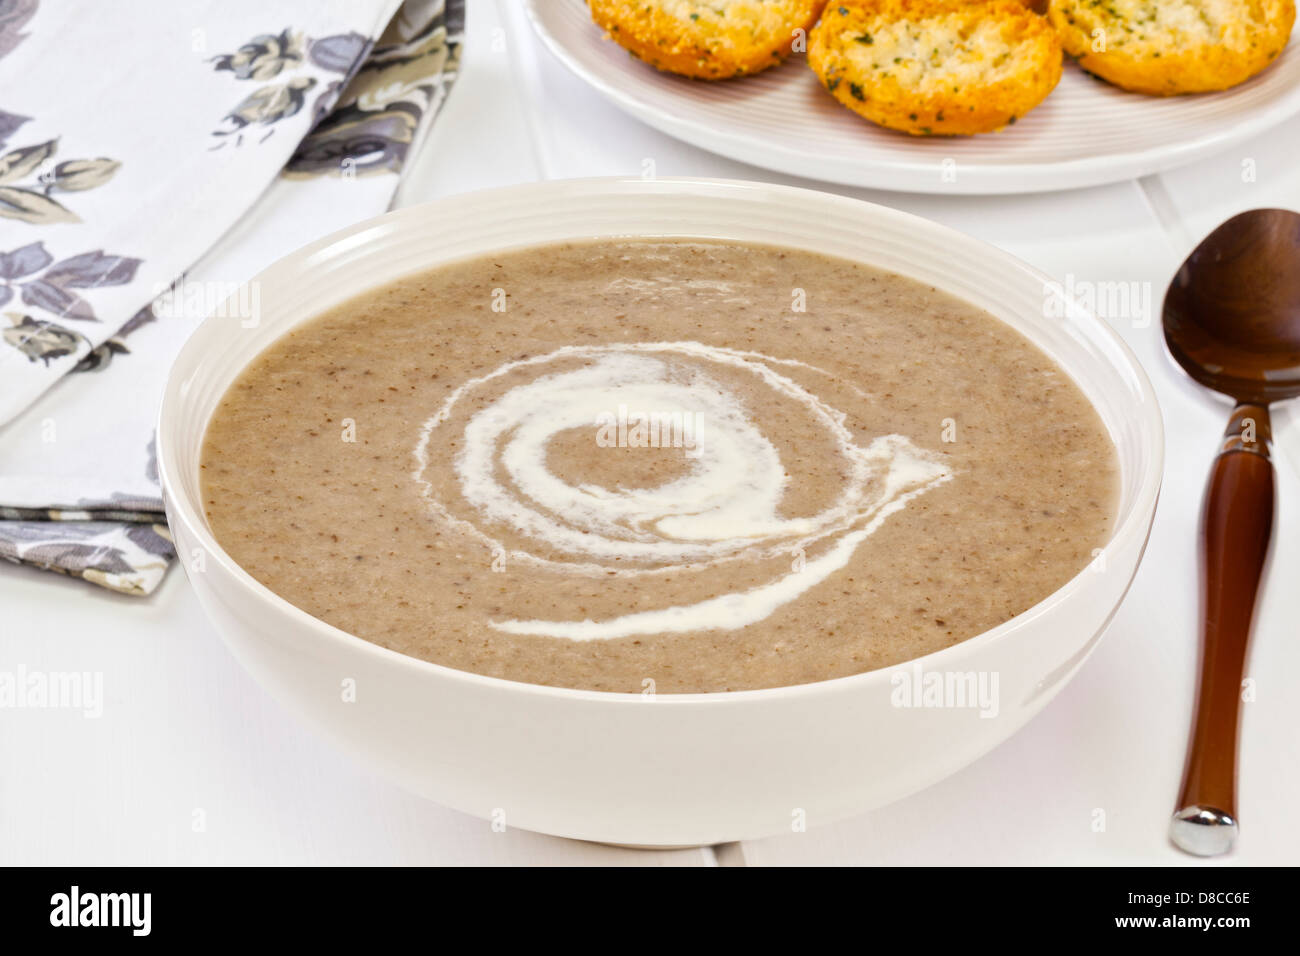 Mushroom Soup - a bowl of mushroom soup with a swirl of creme fraiche, served with garlic toast. Stock Photo